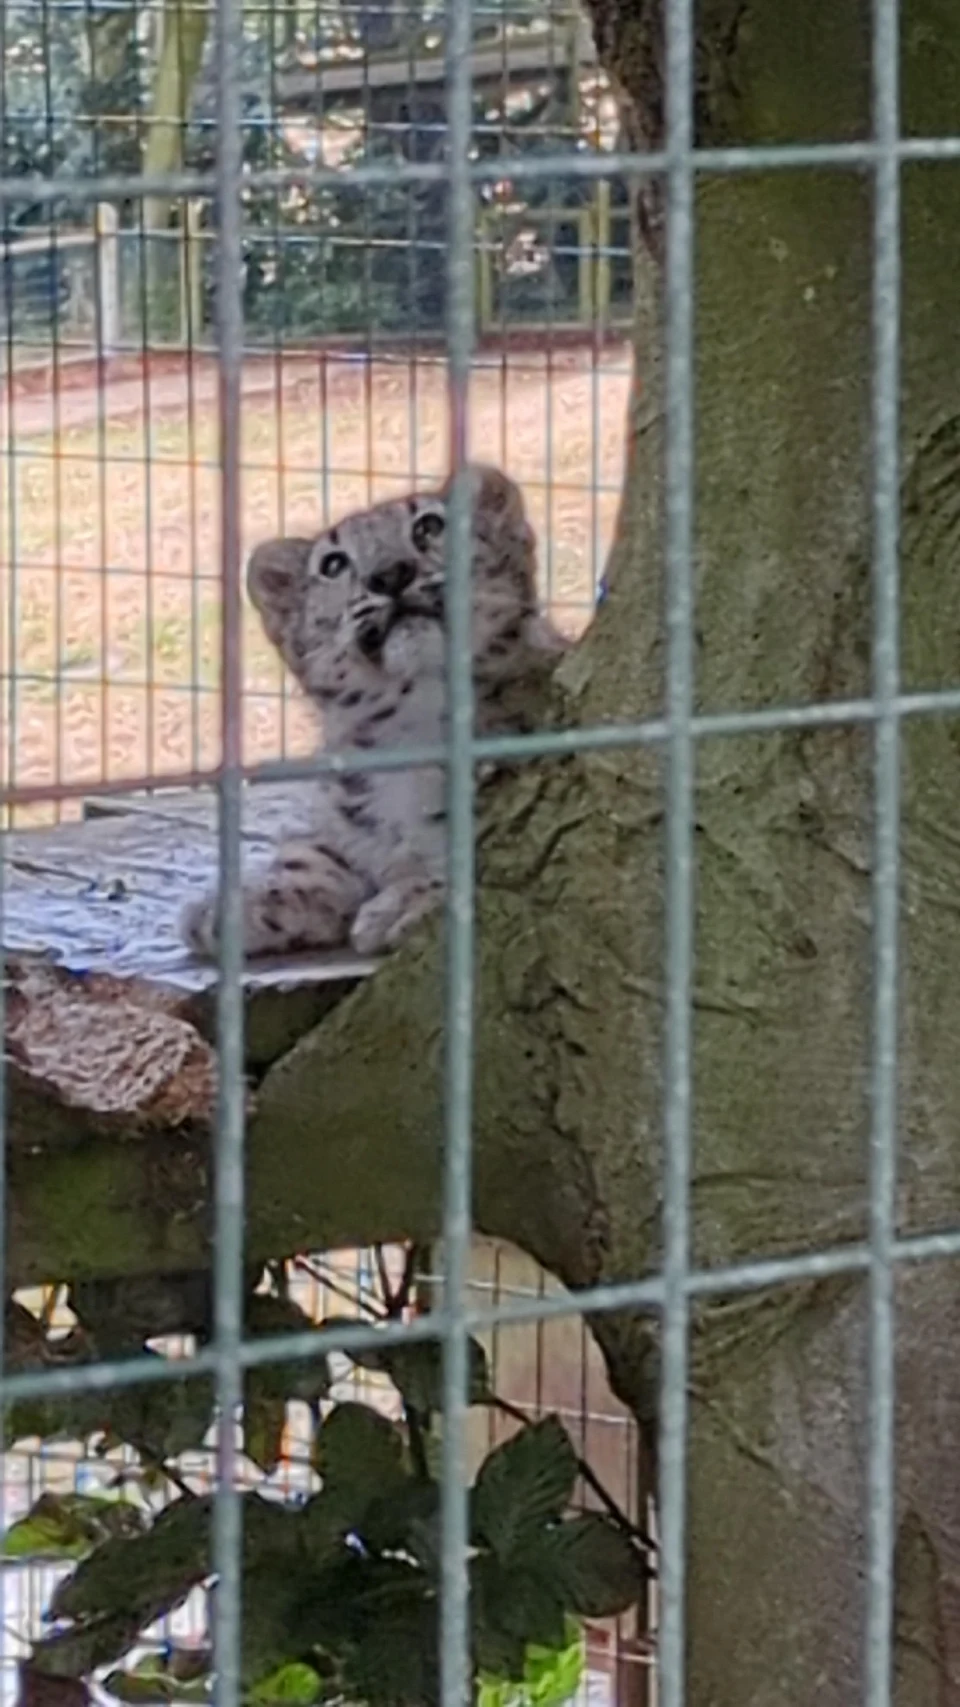 last year I went to a zoo where there were two snow leopards, and returned to the zoo last week to see they had a cub